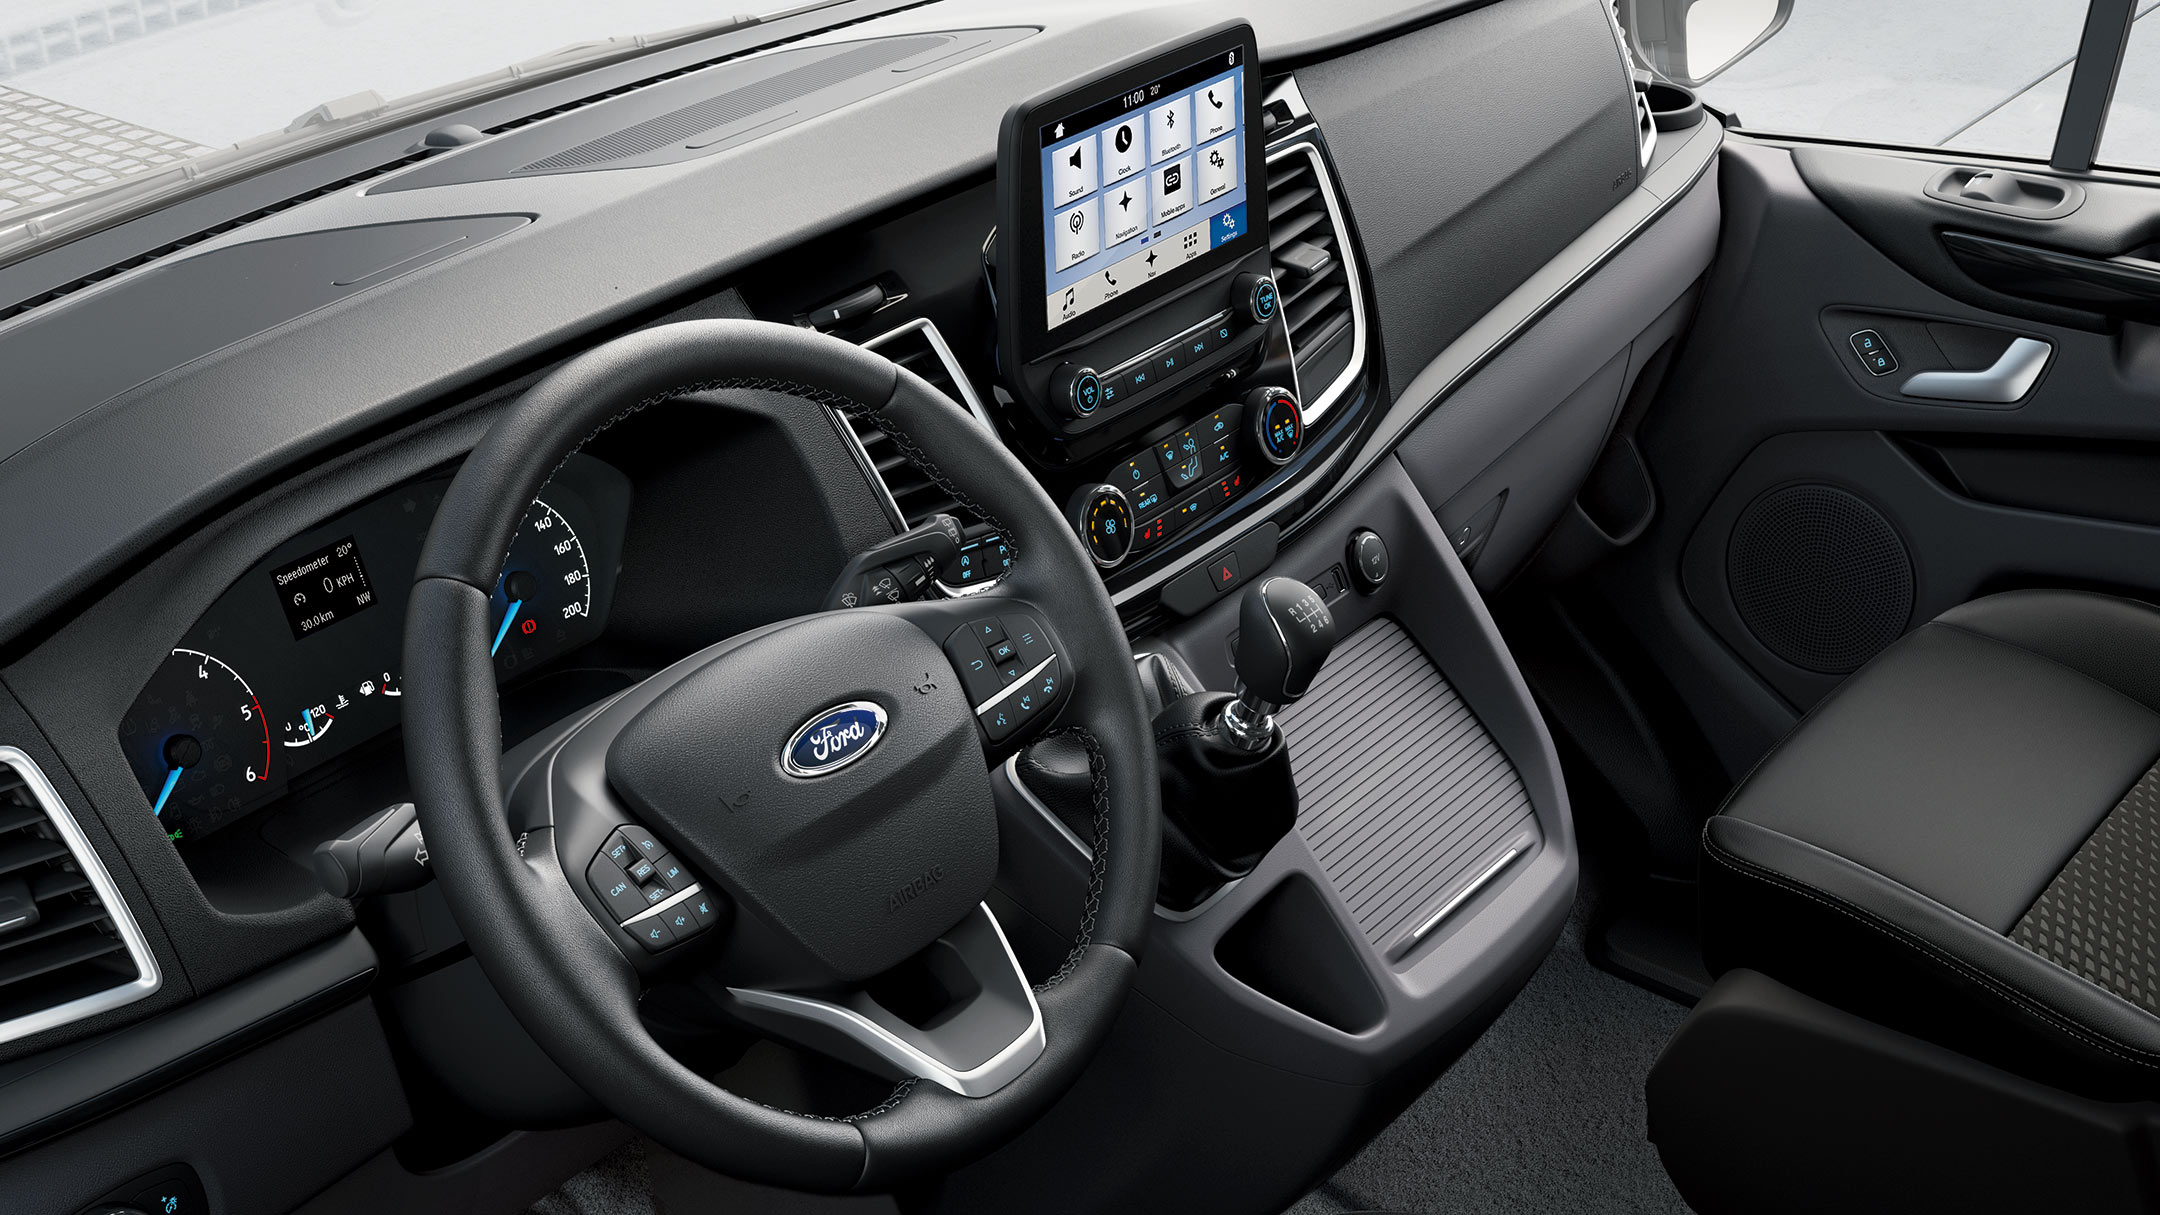 Ford Tourneo interior display with SYNC3 and FordPass connect dashboard